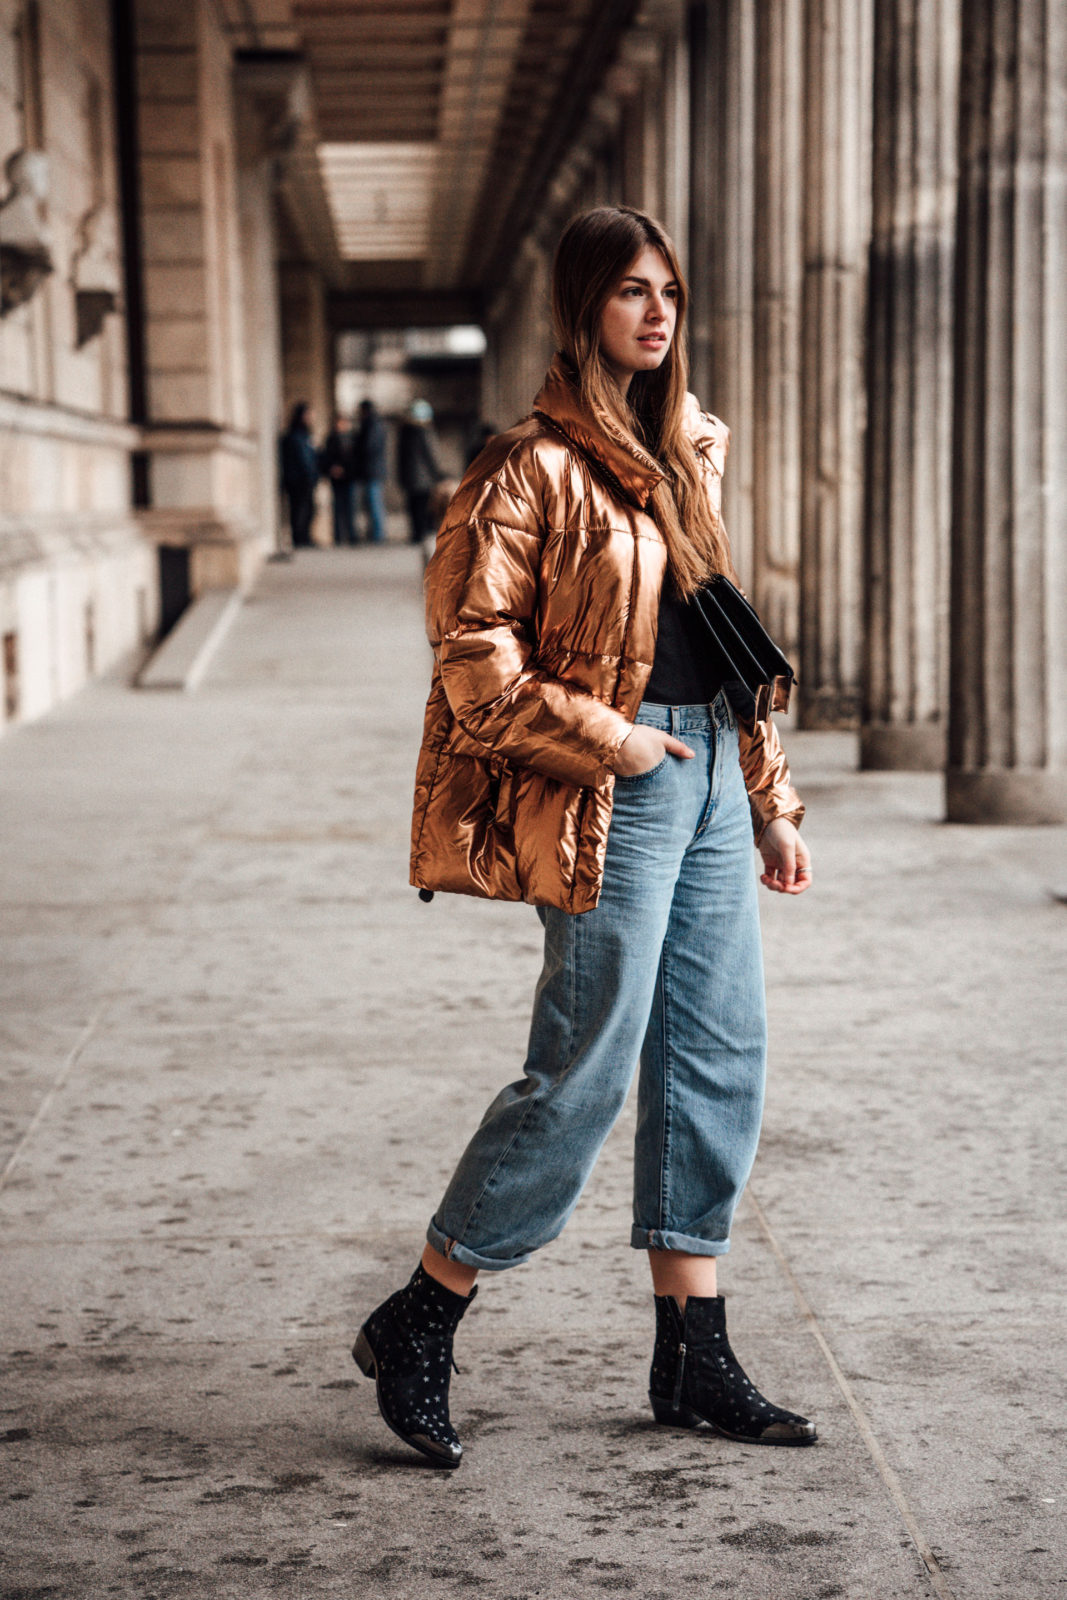 Metallic Puffer Jacket combined with Baggy Jeans || Fashionblog Berlin